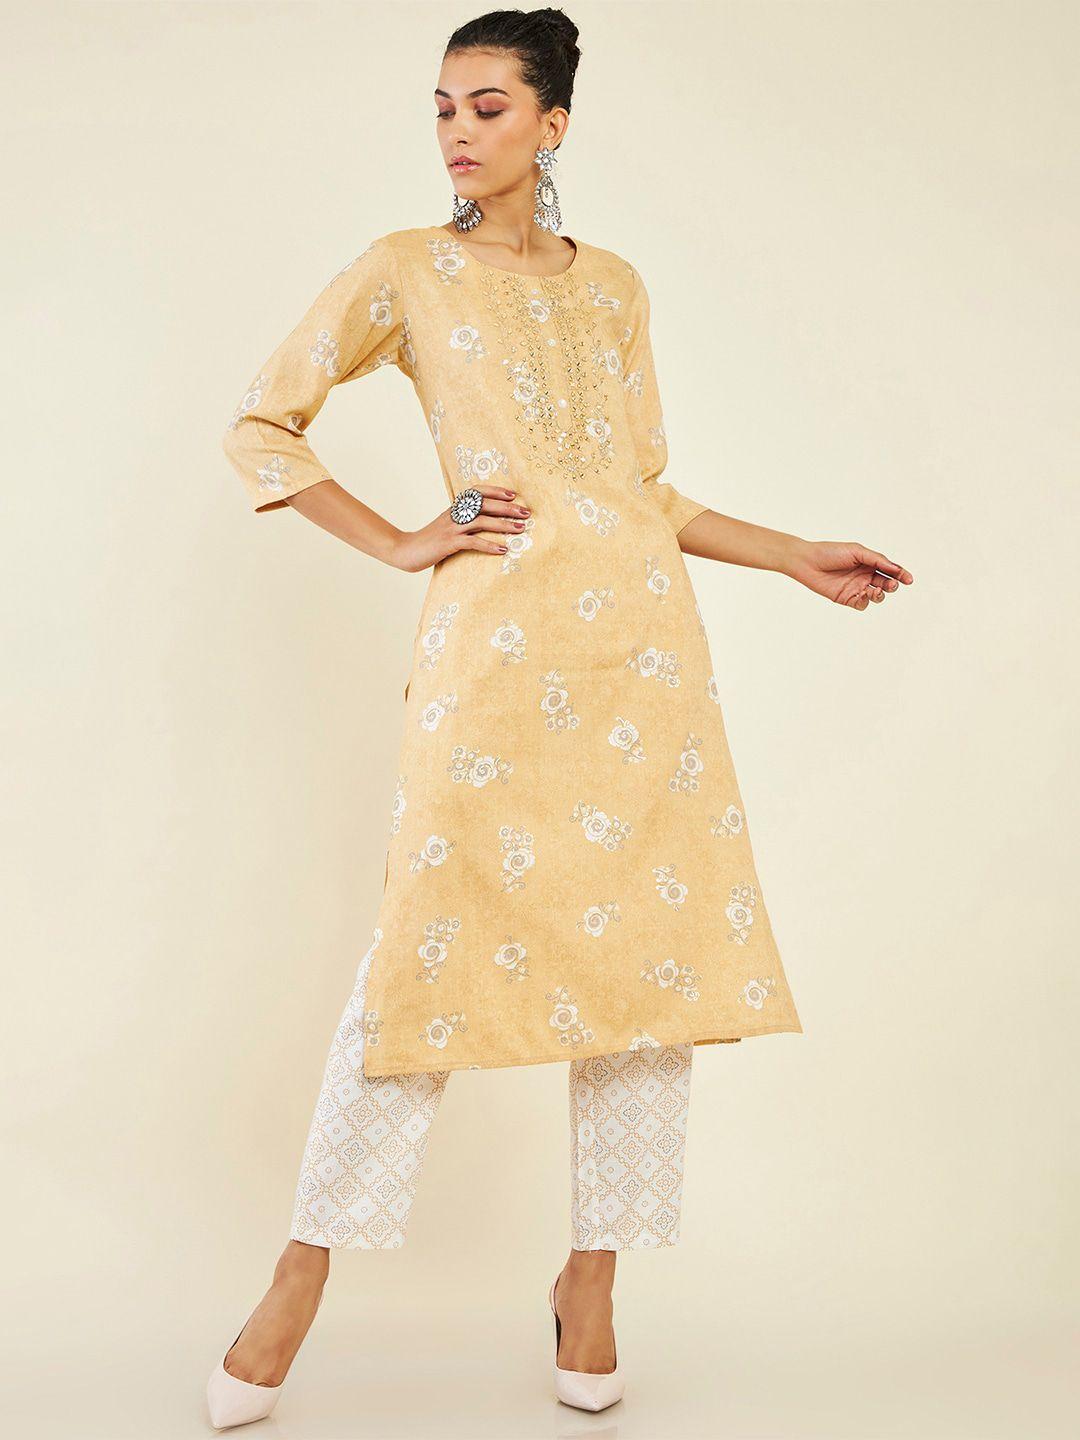 soch floral printed mirror work kurta with trousers